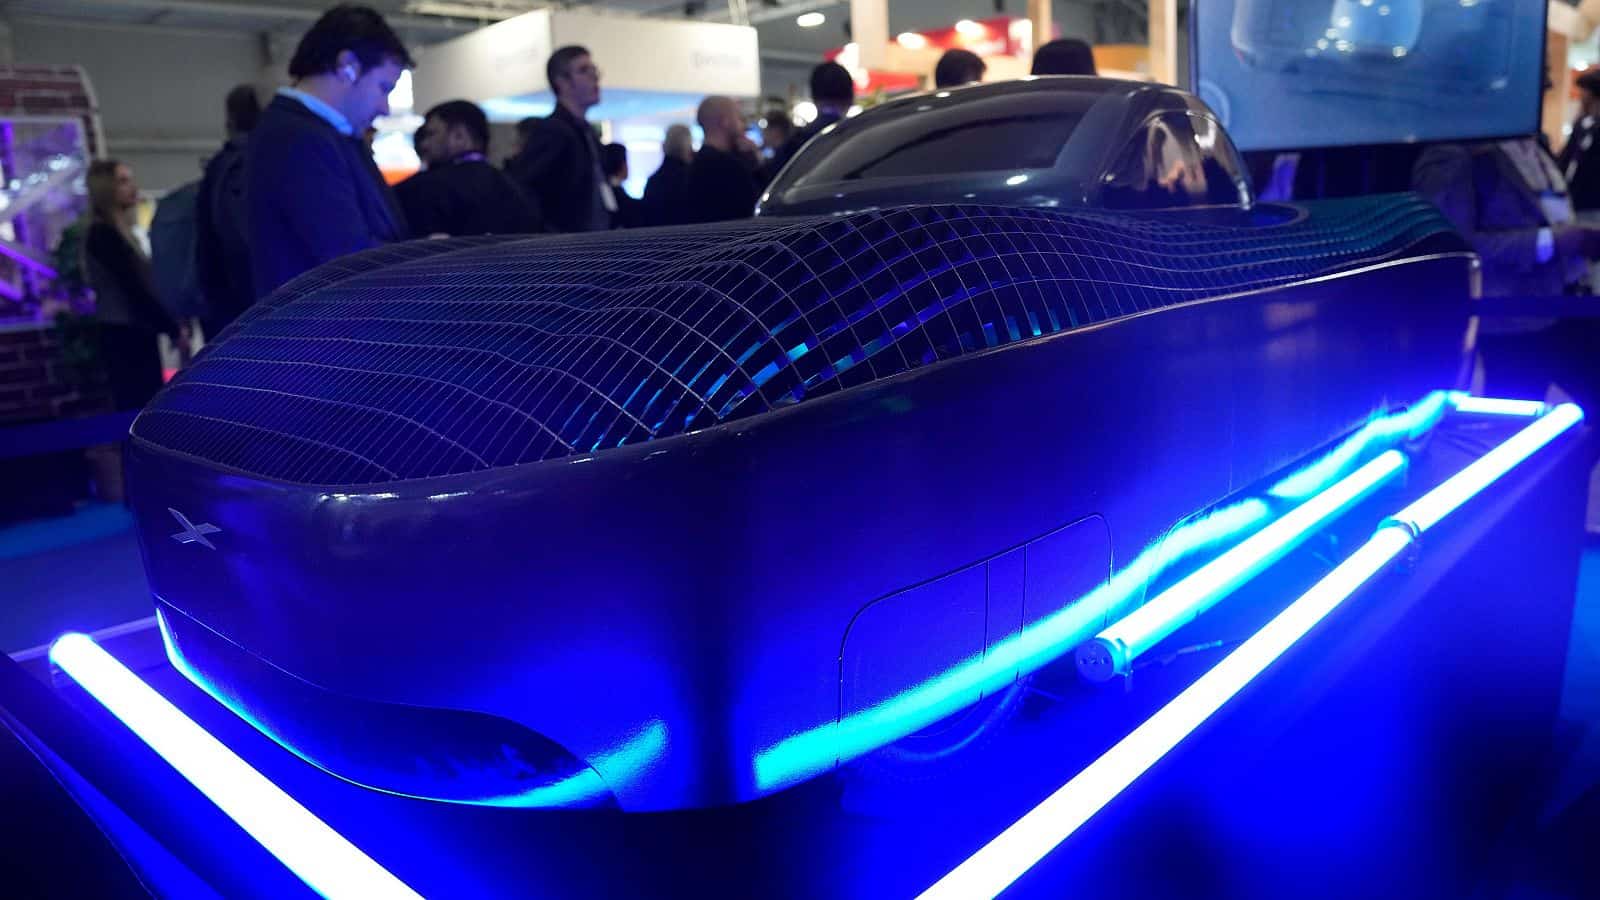 The Future of Mobility with the Alef Model A Flying Car at MWC